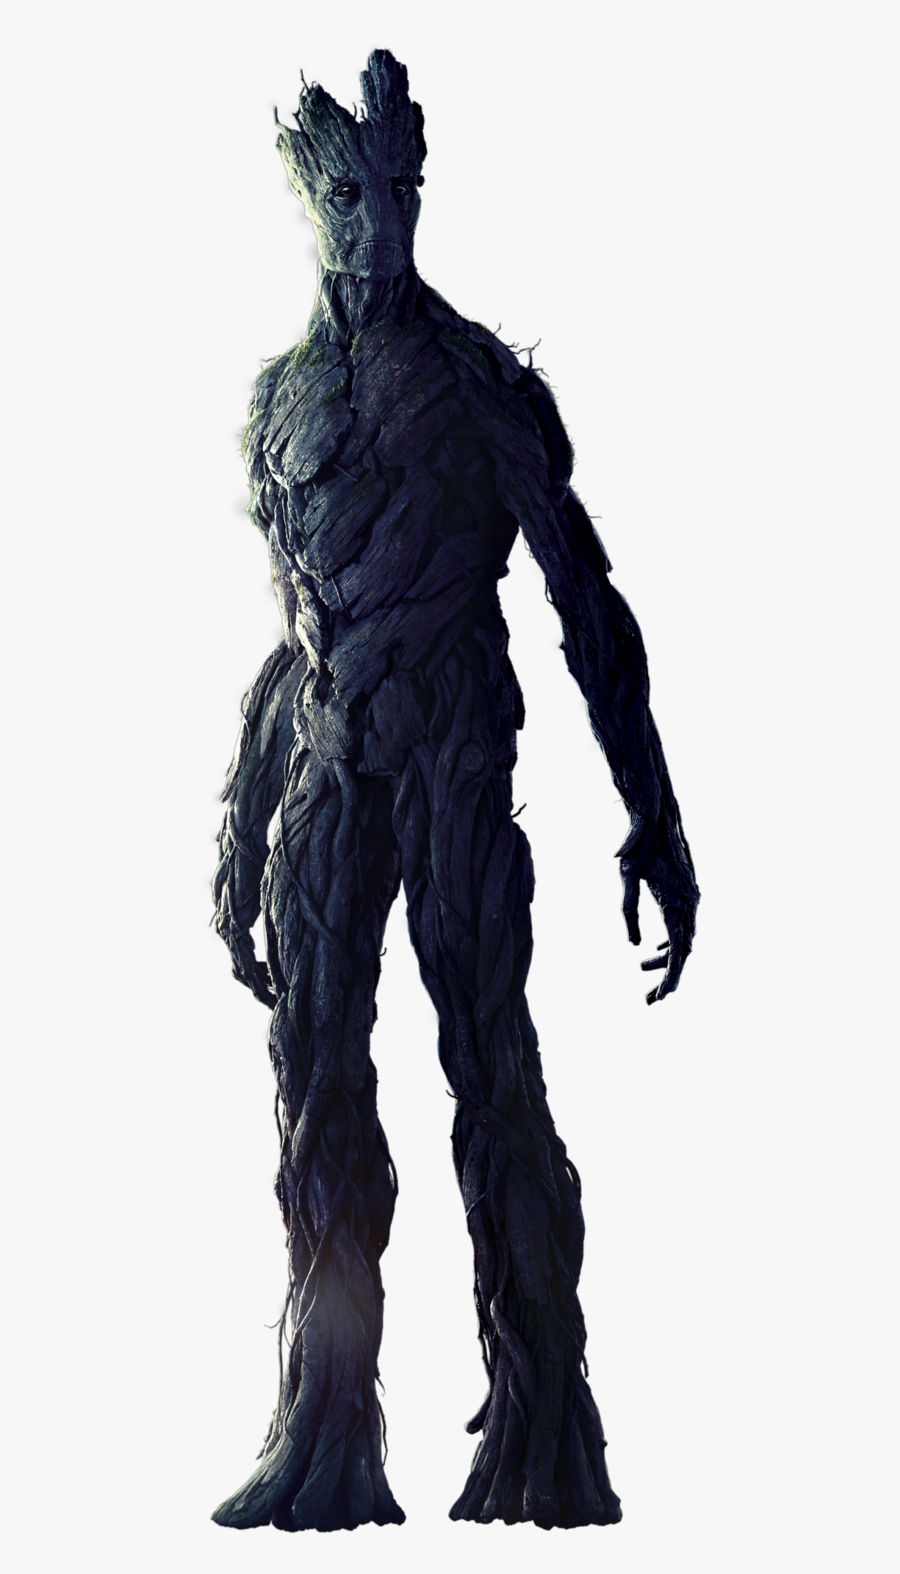 Guardians Of The Galaxy Png Image - Guardians Of The Galaxy Groot Png, Transparent Clipart